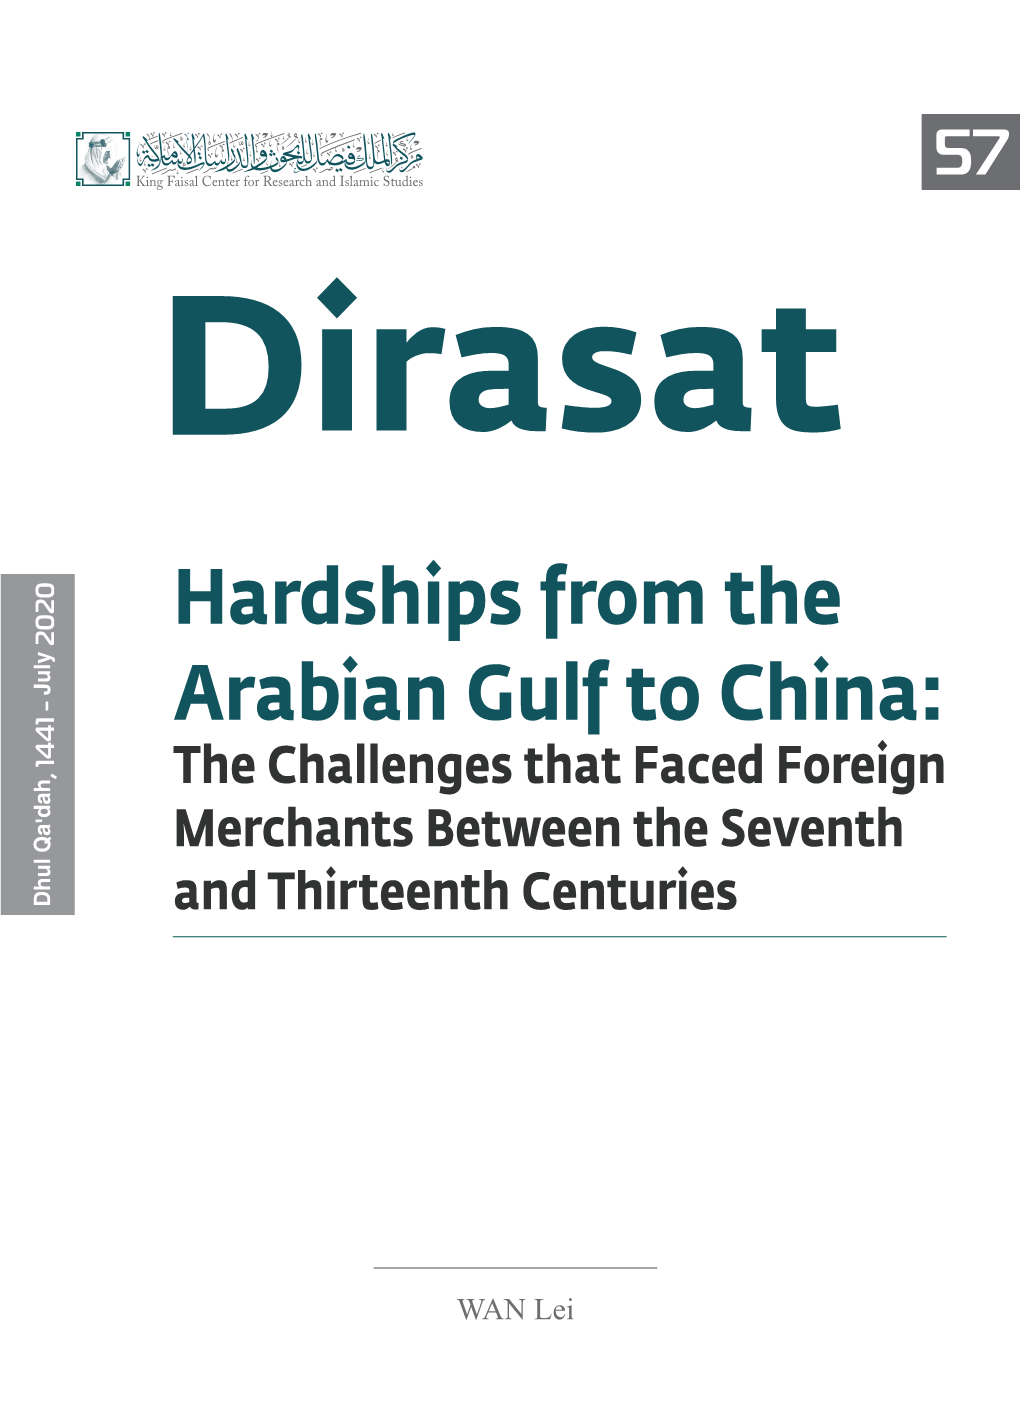 Hardships from the Arabian Gulf to China: the Challenges That Faced Foreign Merchants Between the Seventh